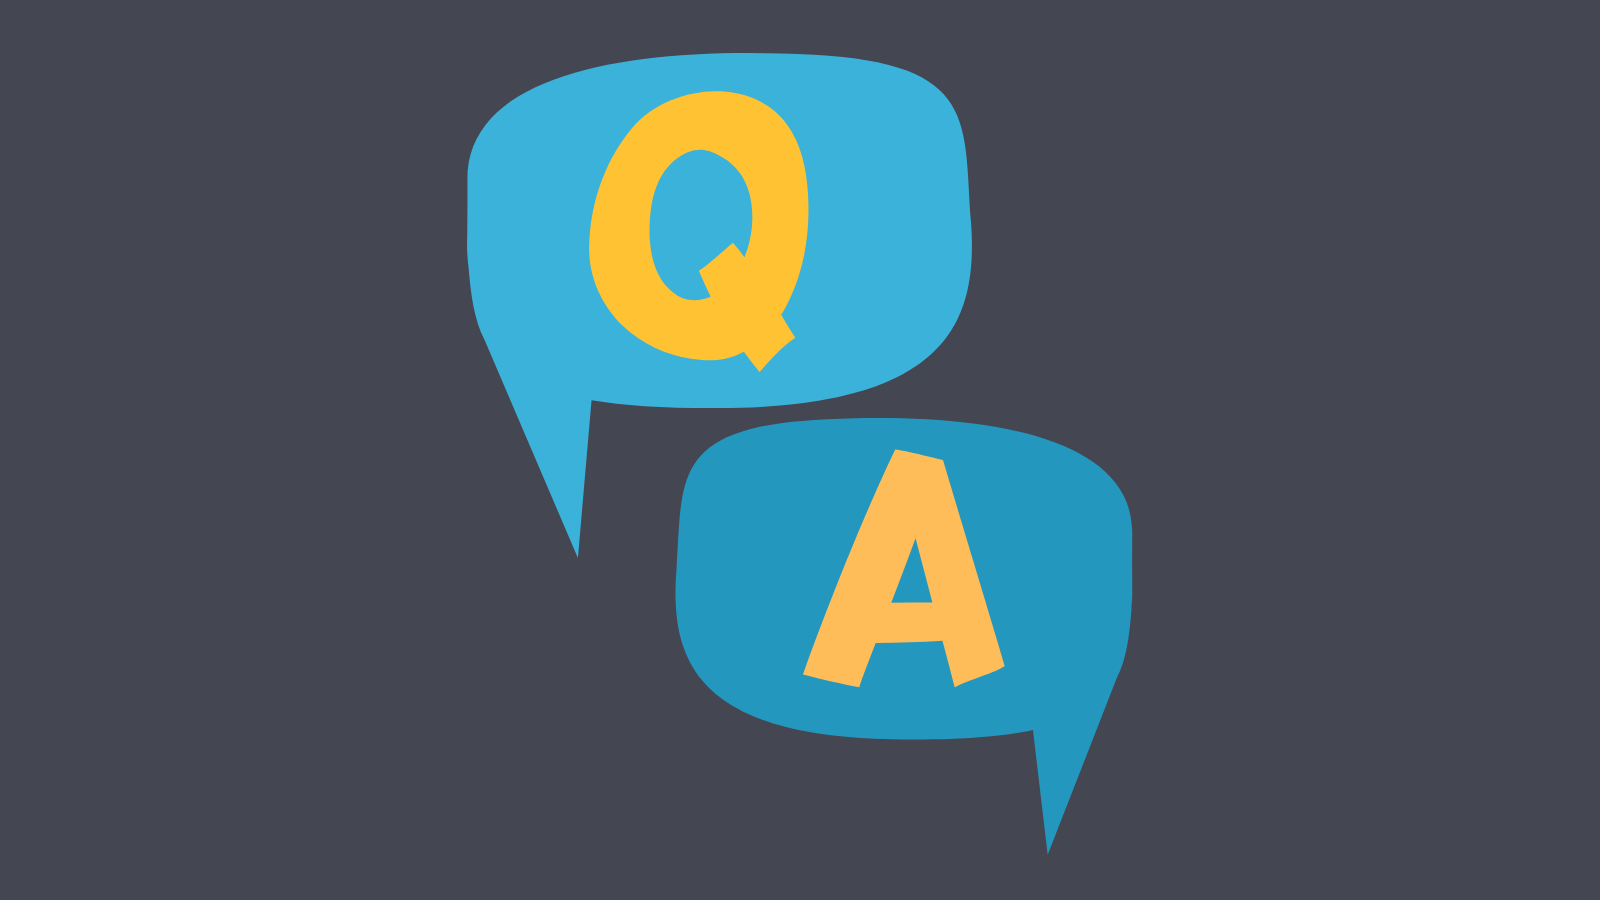 A speech bubble with the letter Q and another with the letter A